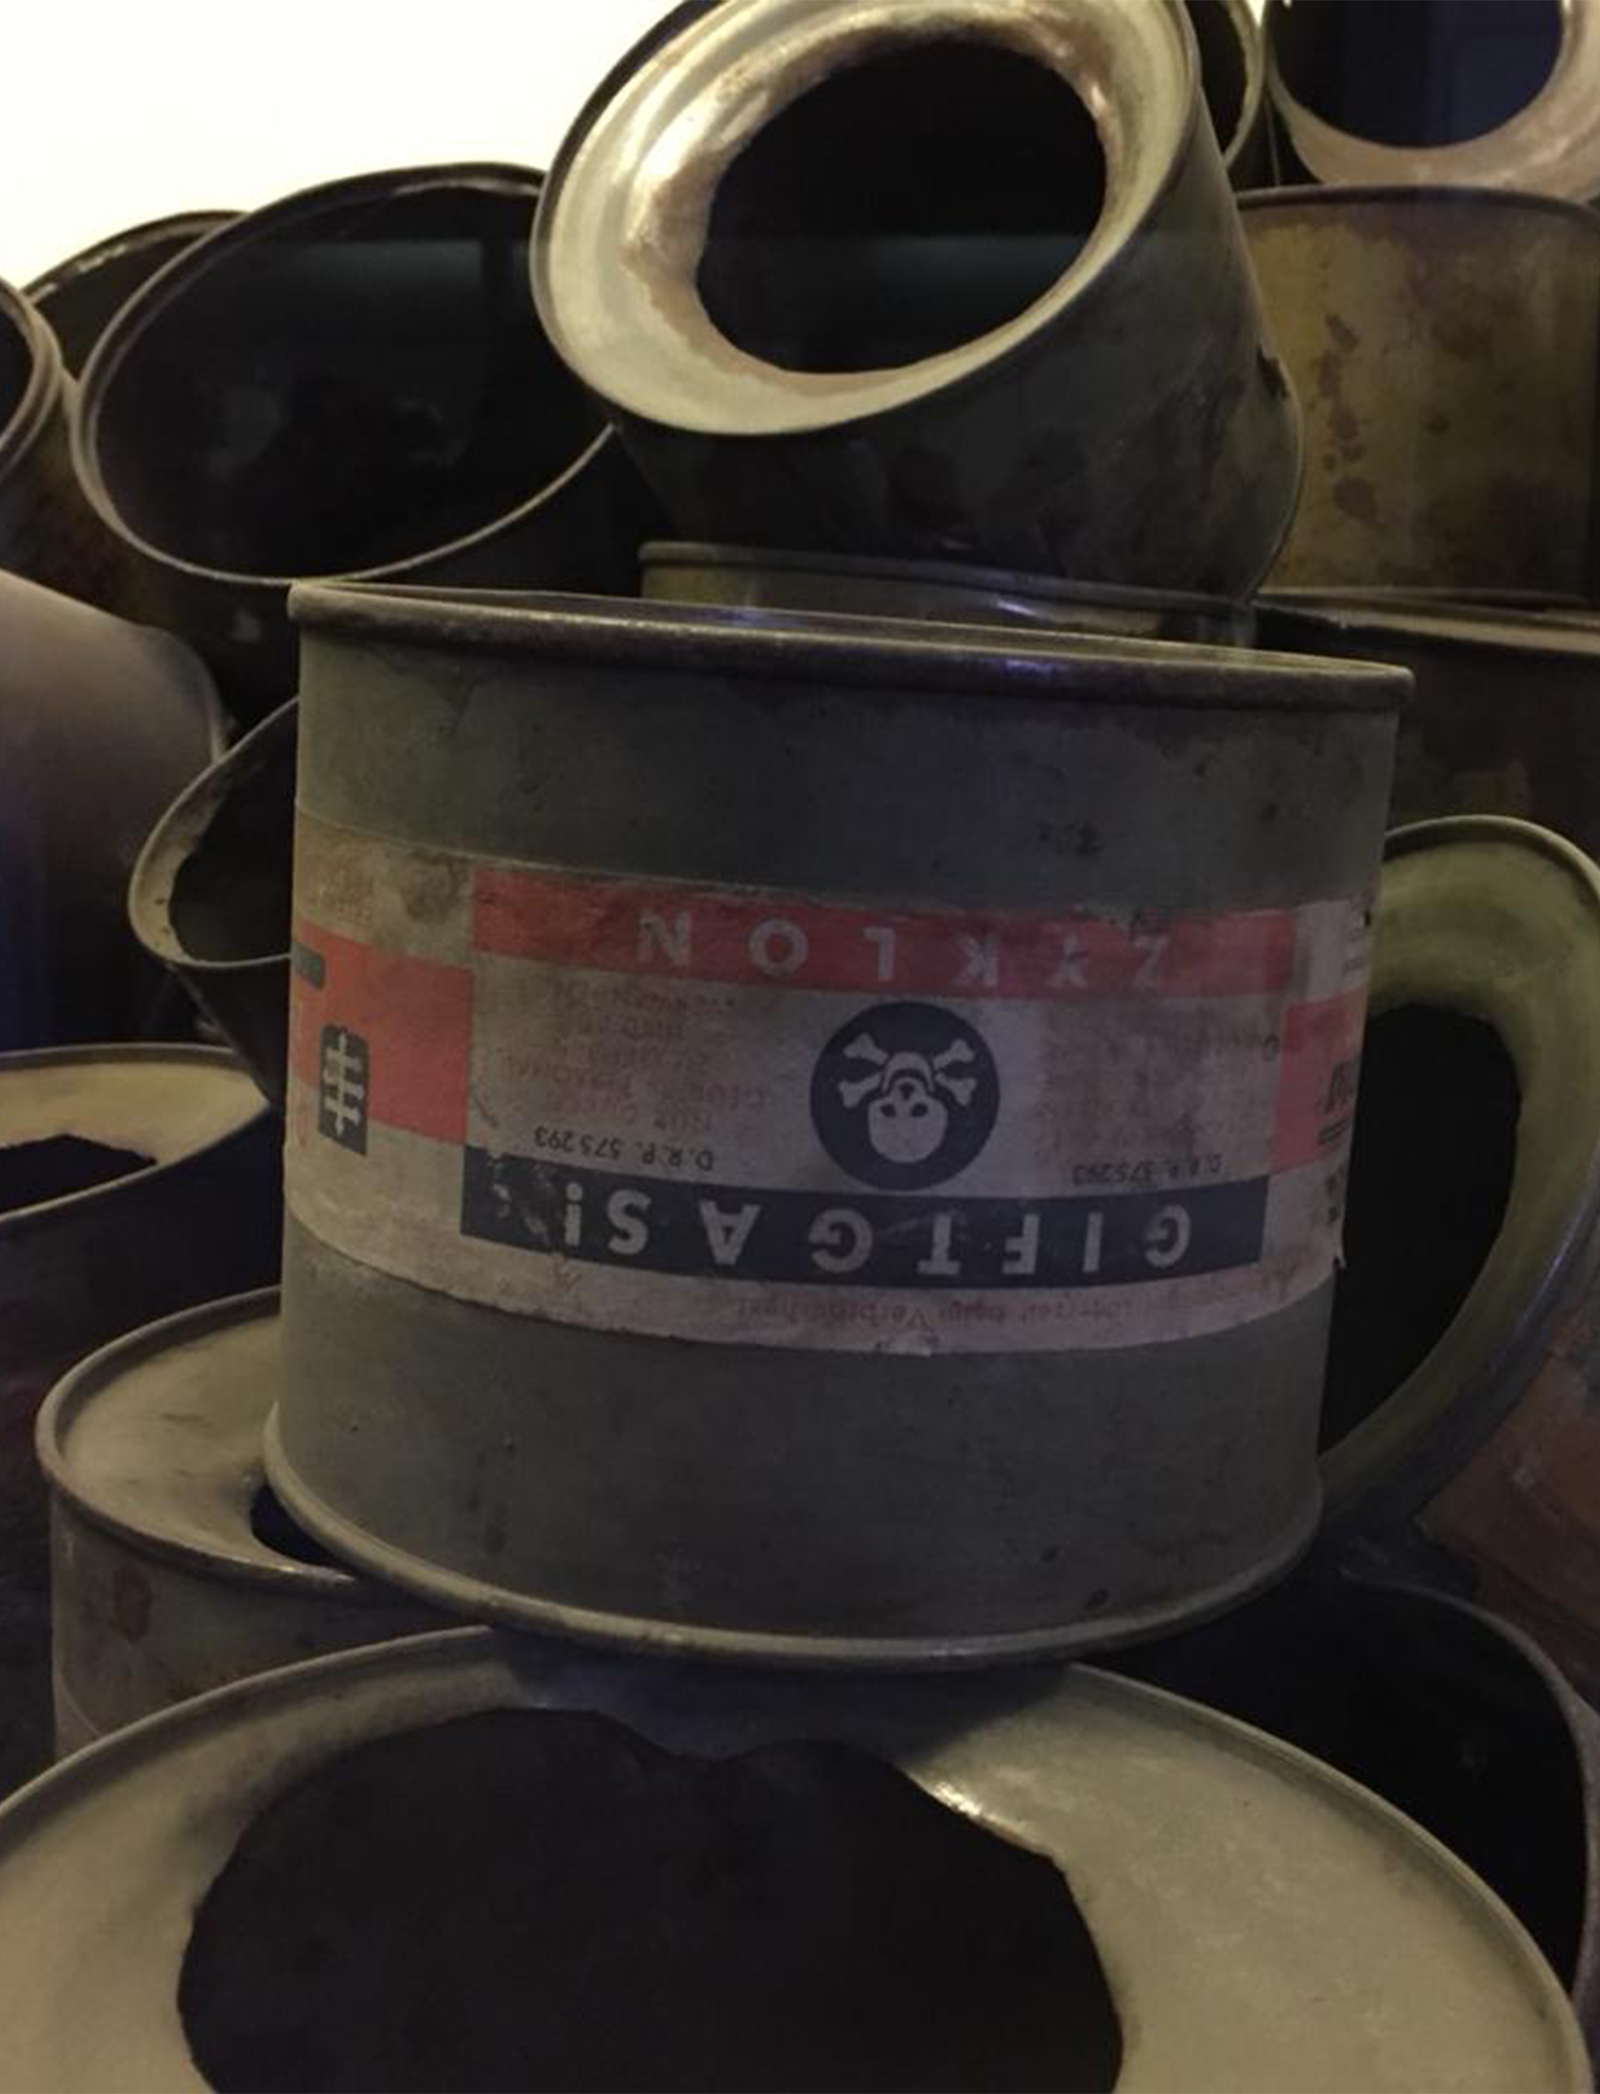 Canisters of Zyklon-B gas on display at Auschwitz Museum and Memorial Site. Photo: Muziwakithu Maseko